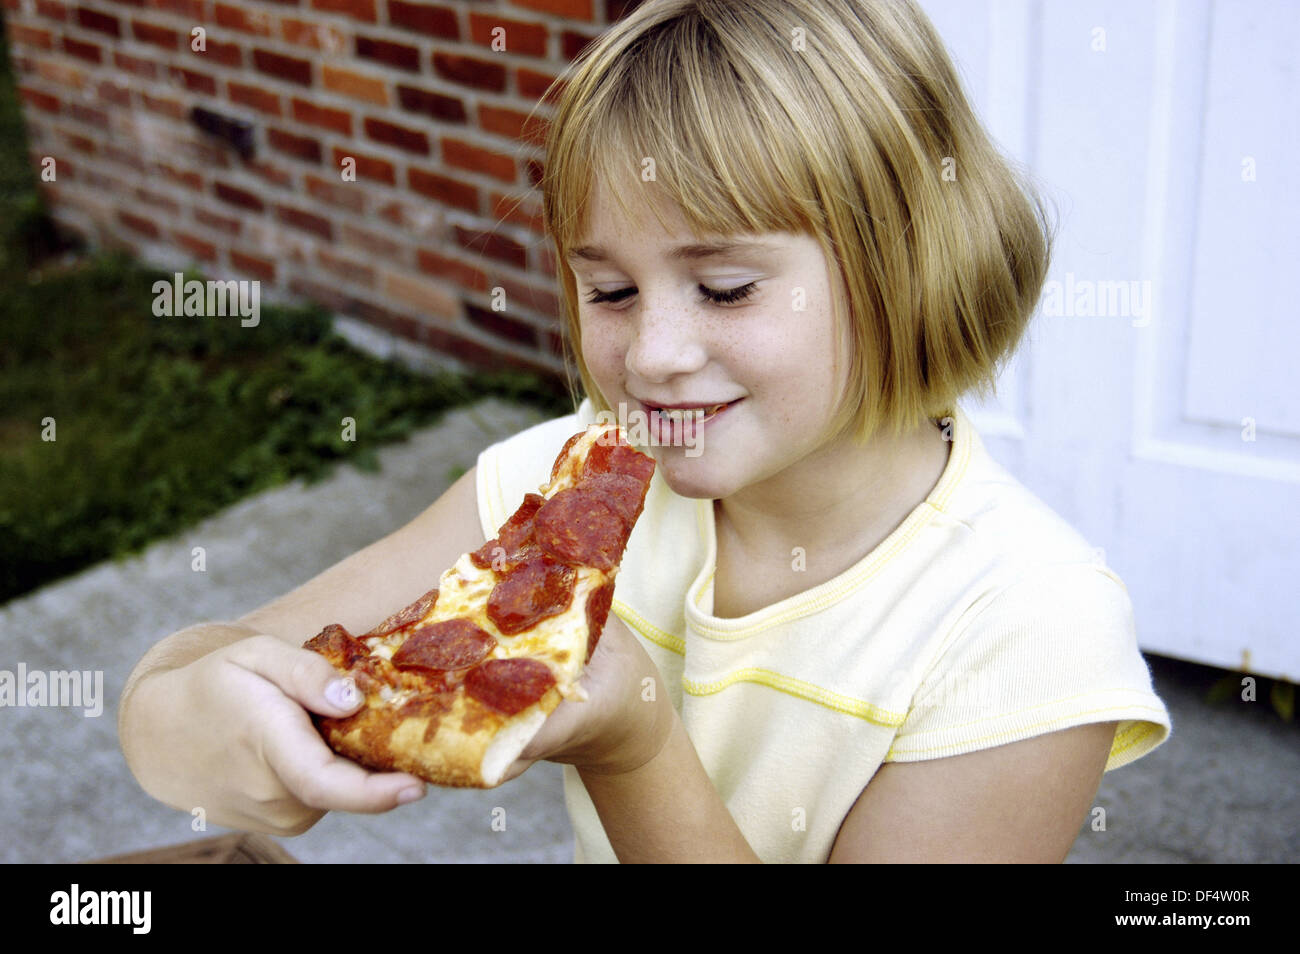 Seven year old girl eats pizza Stock Photo